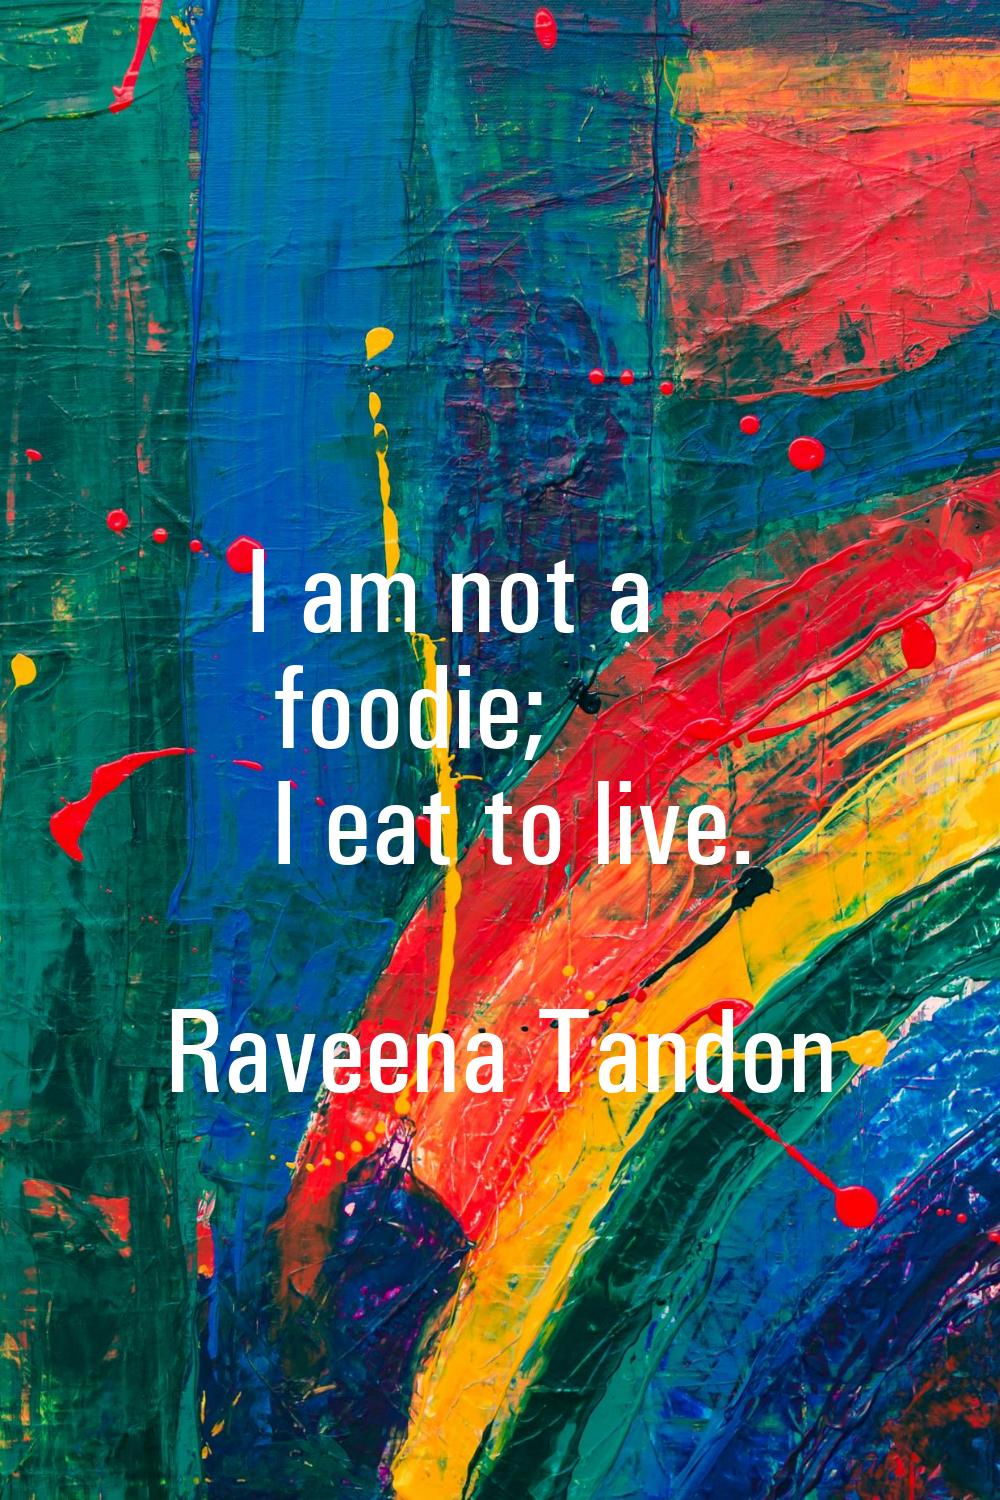 I am not a foodie; I eat to live.